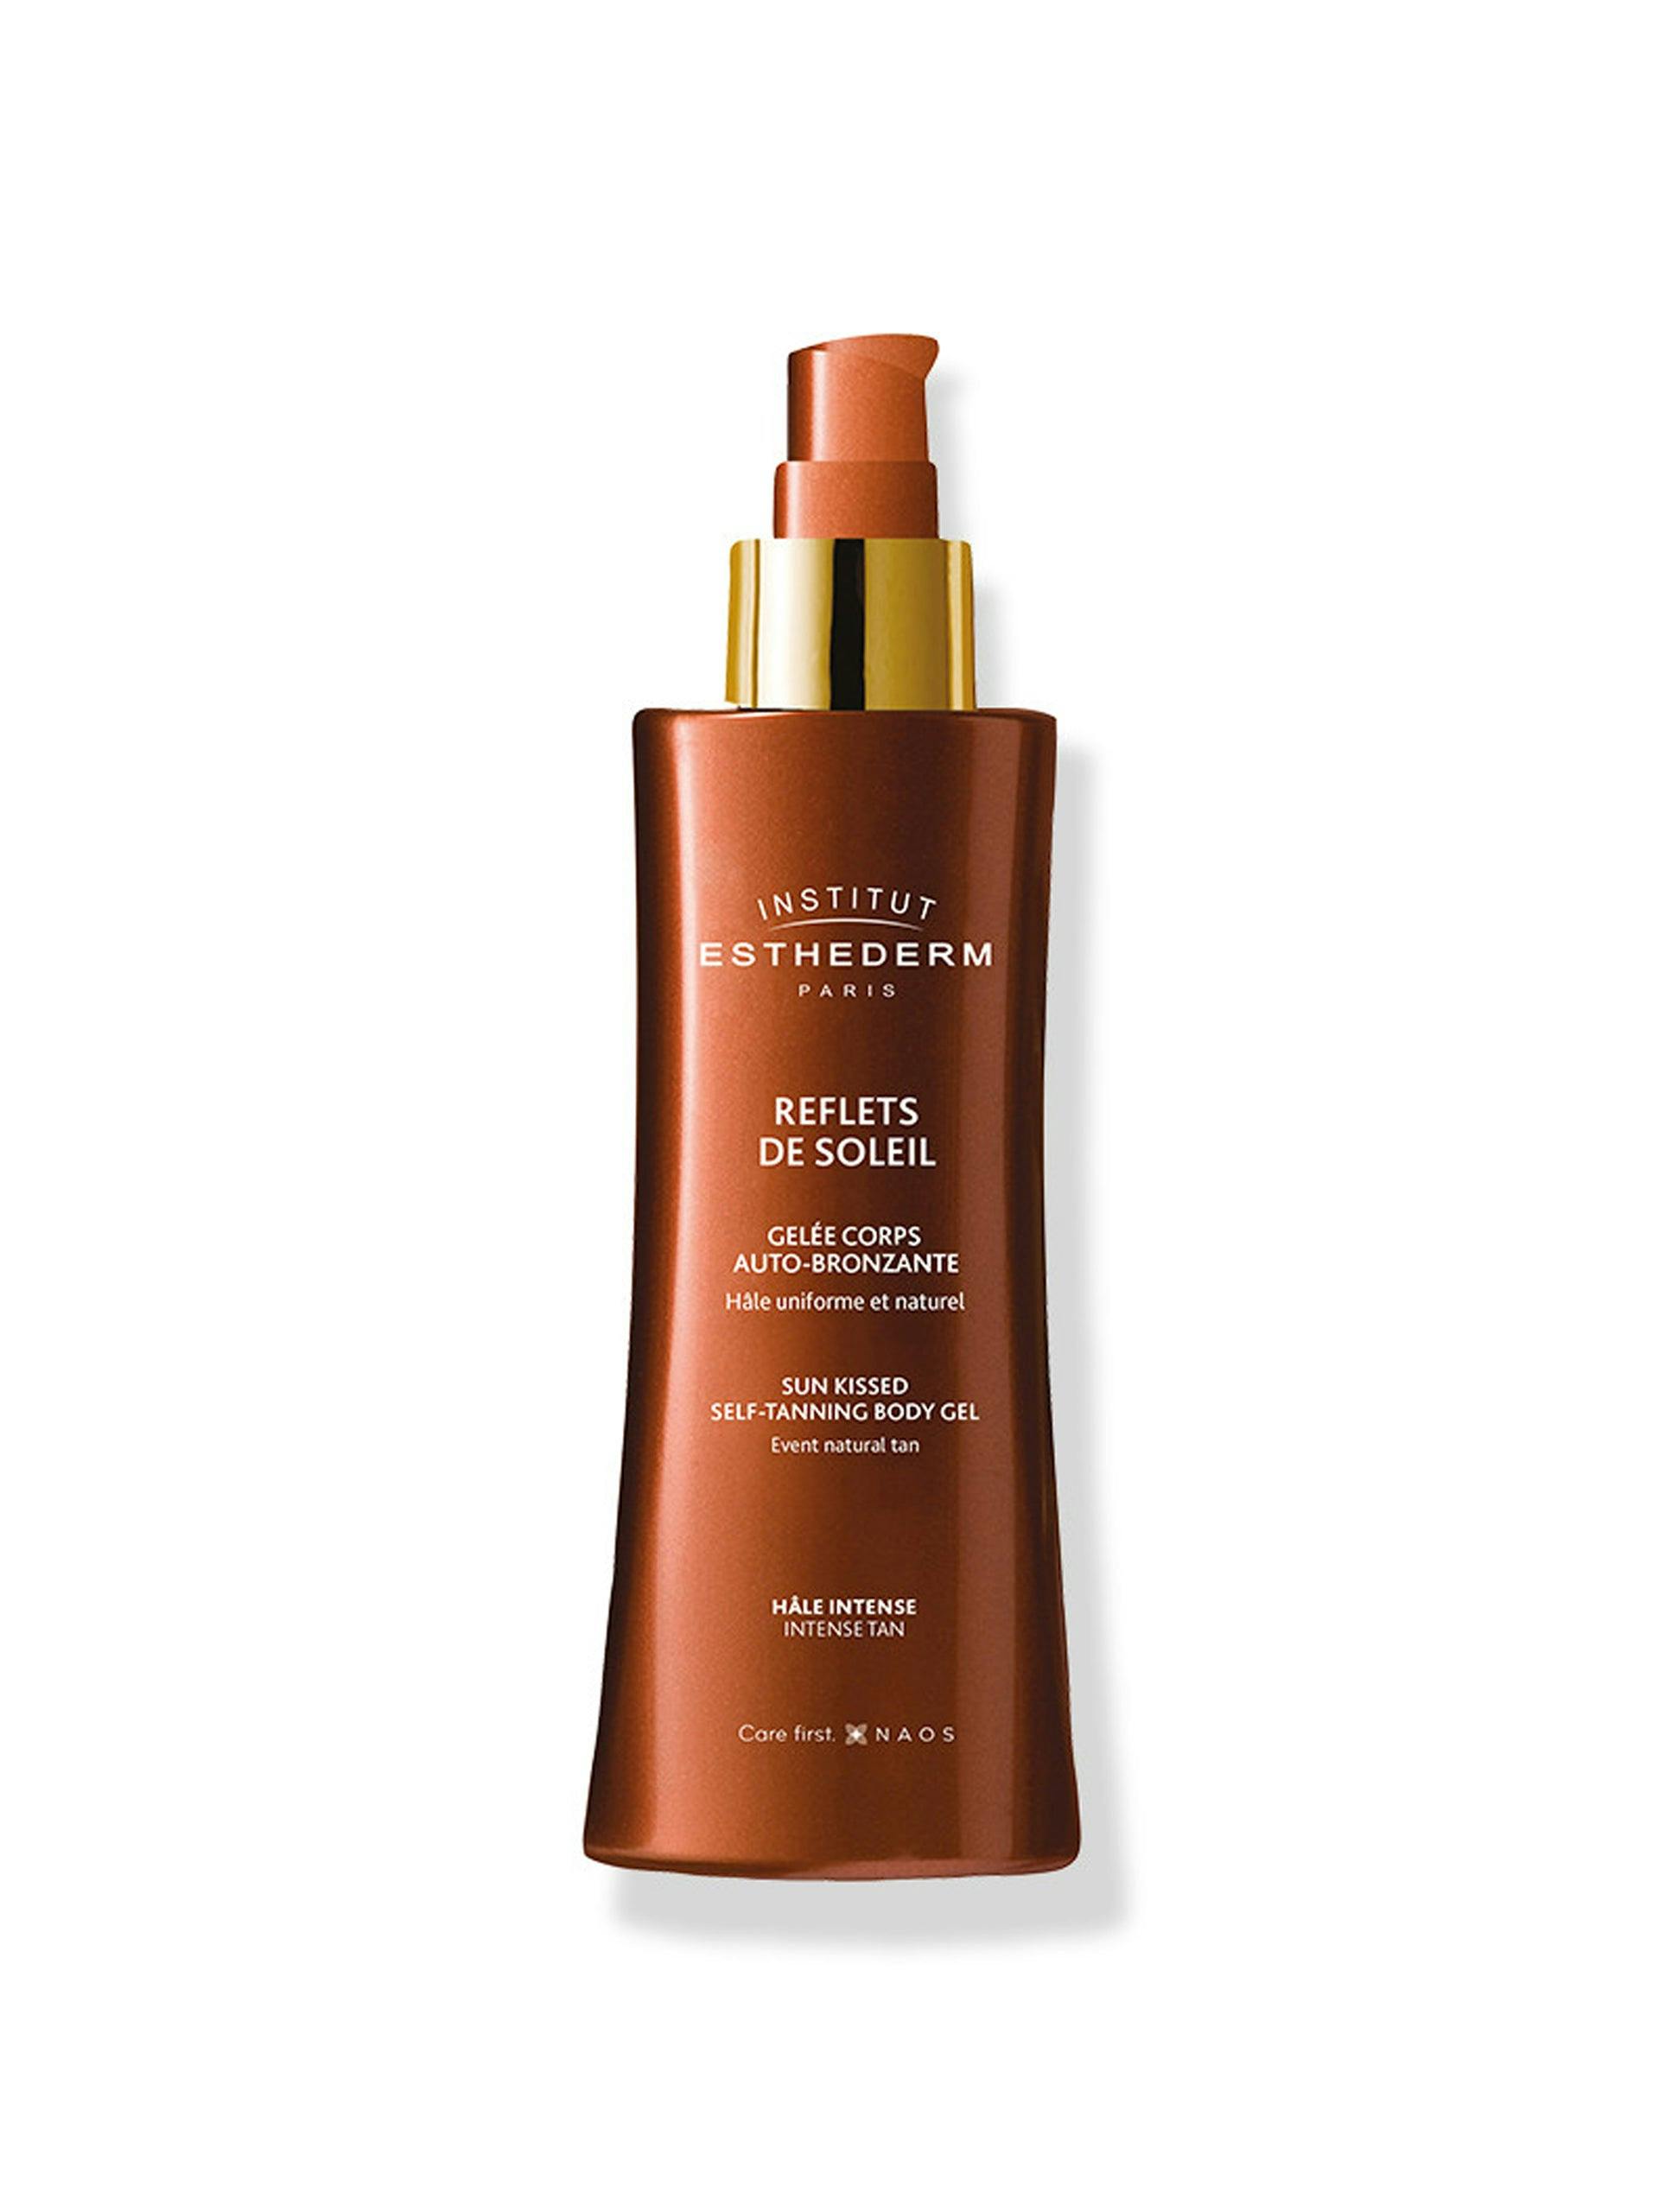 Self-tanning body lotion